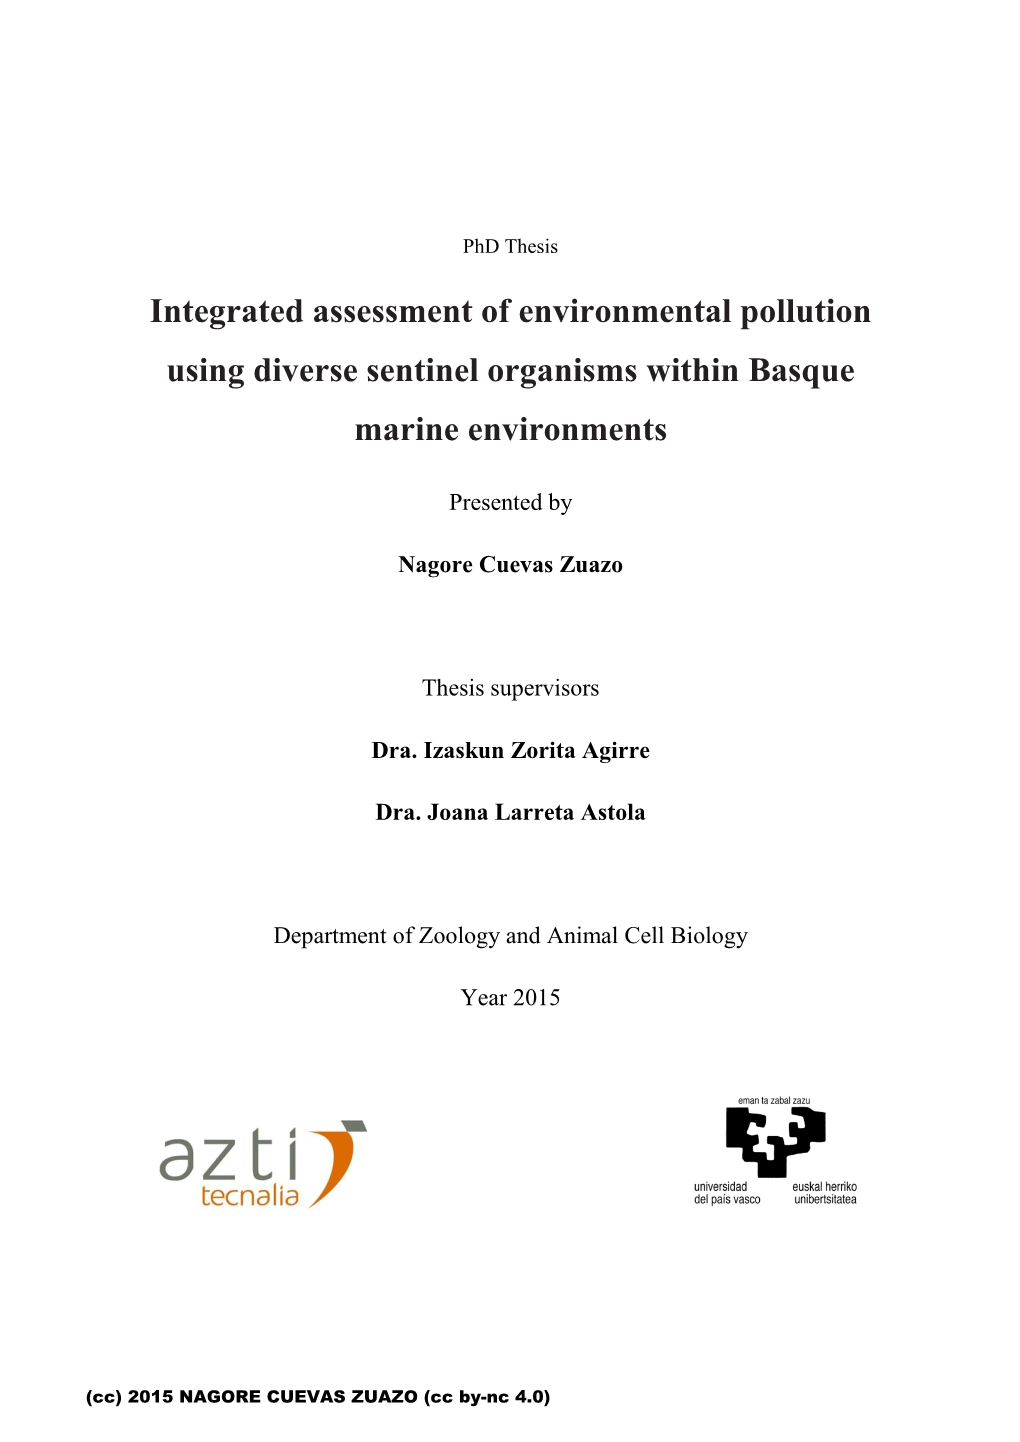 Integrated Assessment of Environmental Pollution Using Diverse Sentinel Organisms Within Basque Marine Environments